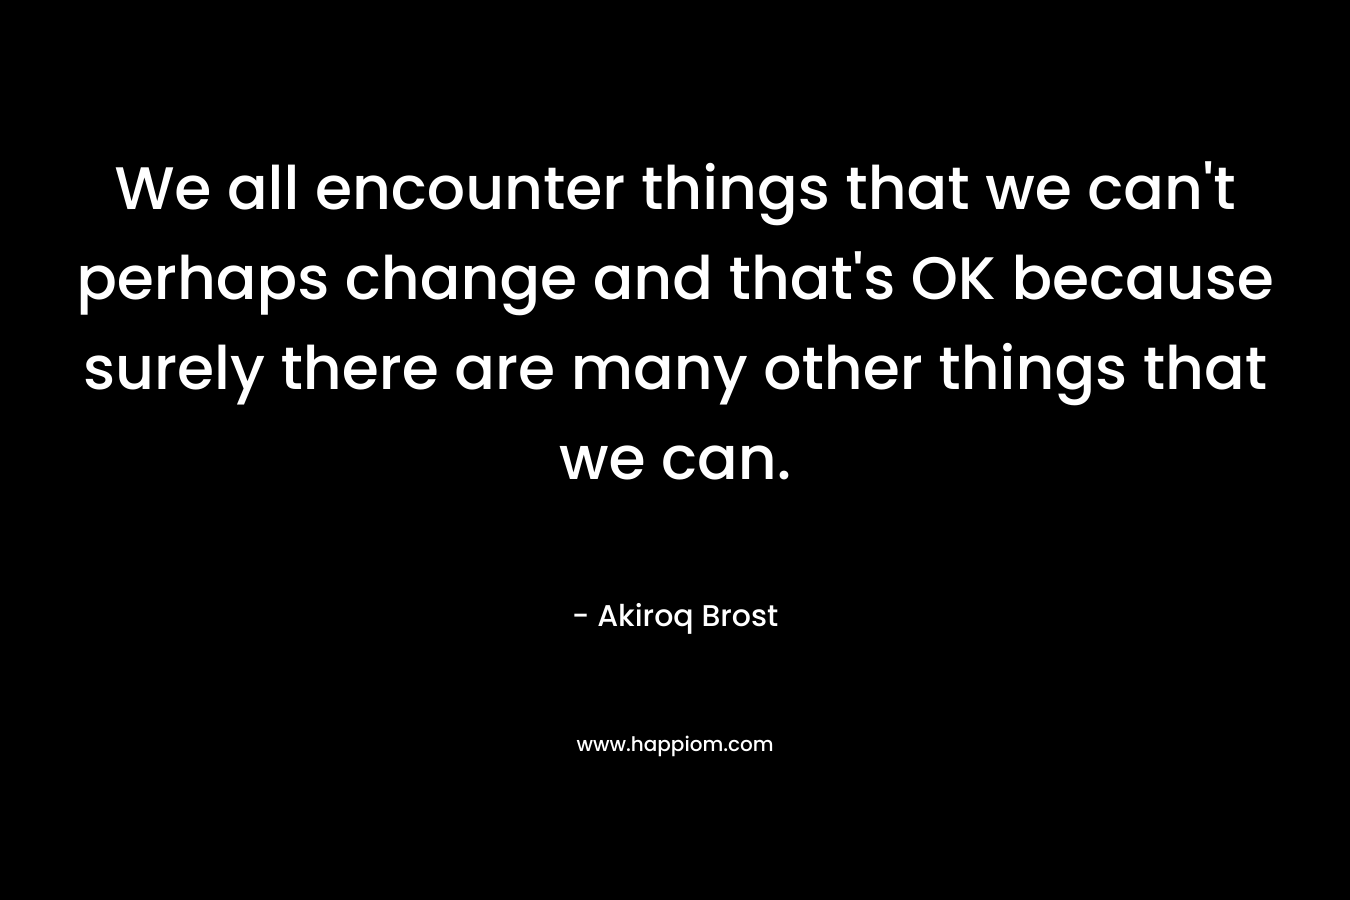 We all encounter things that we can't perhaps change and that's OK because surely there are many other things that we can.